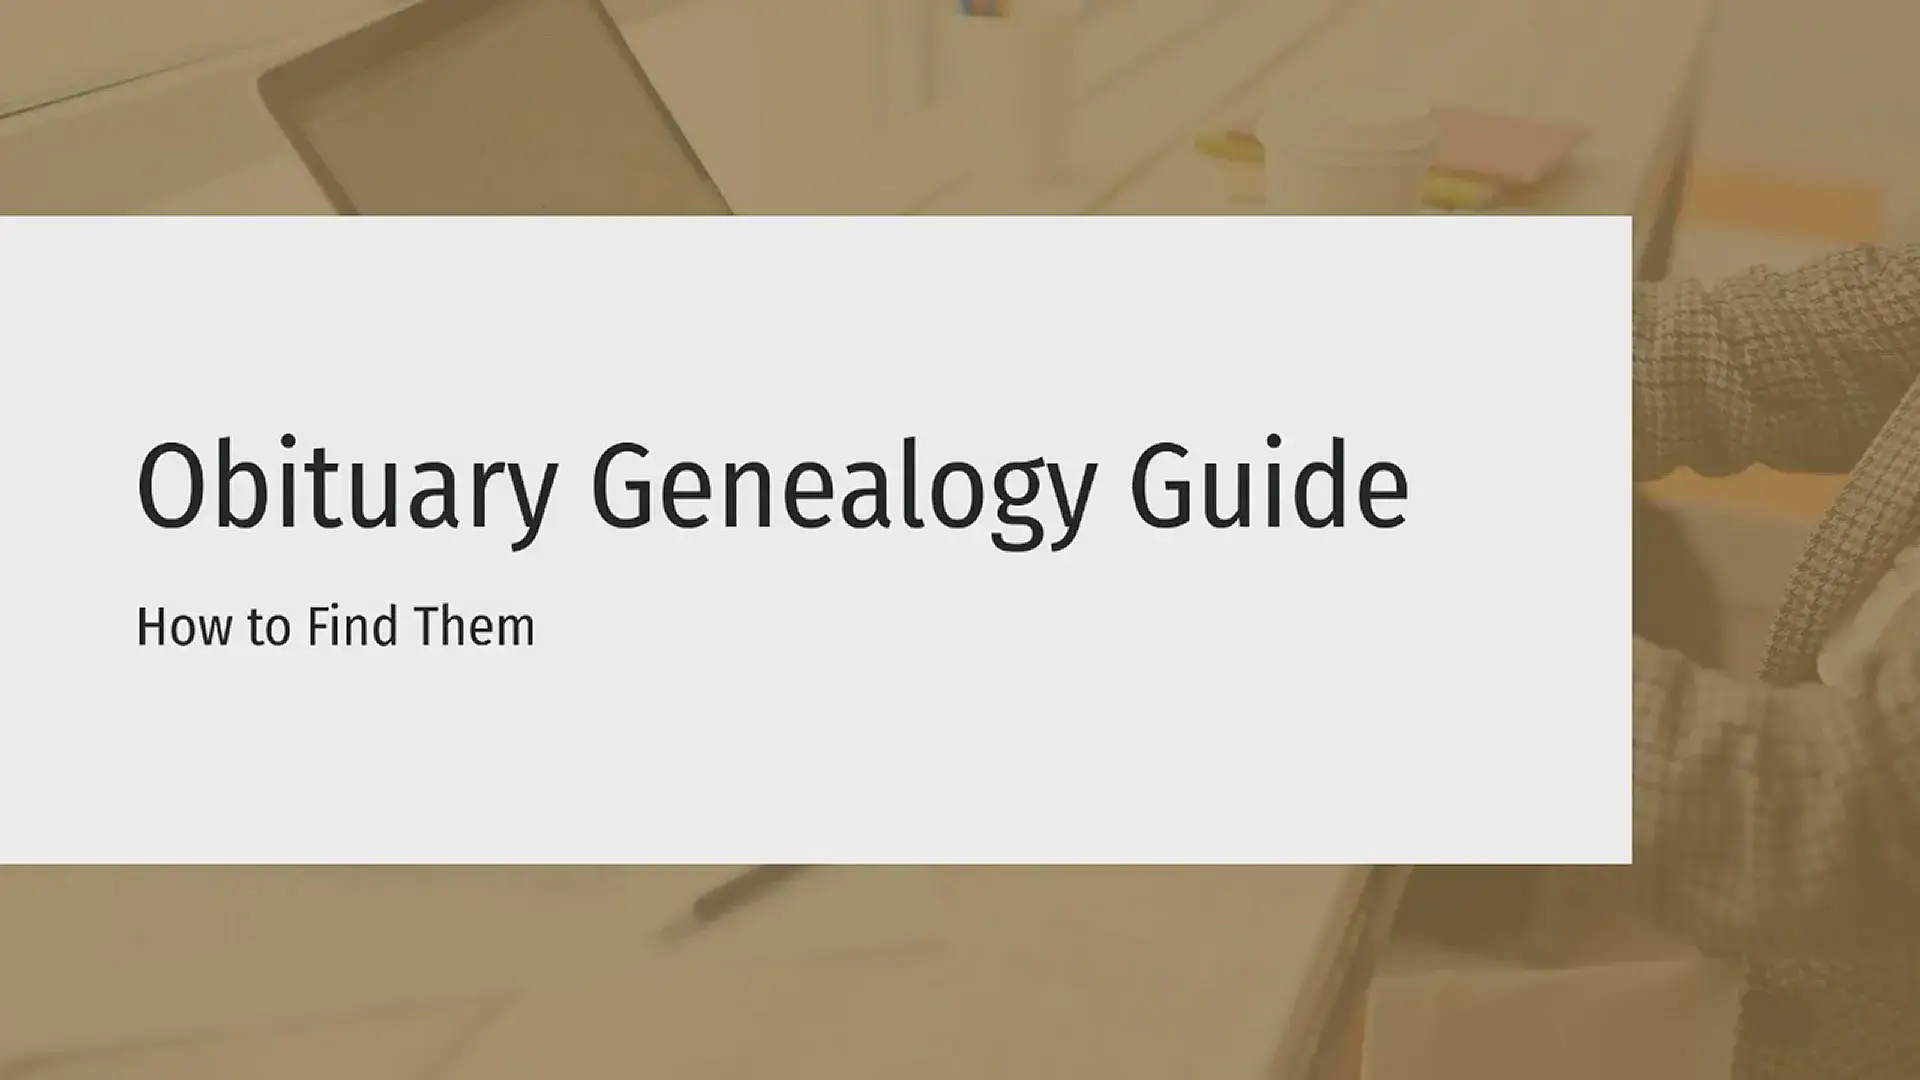 'Video thumbnail for Obituary Genealogy Guide'